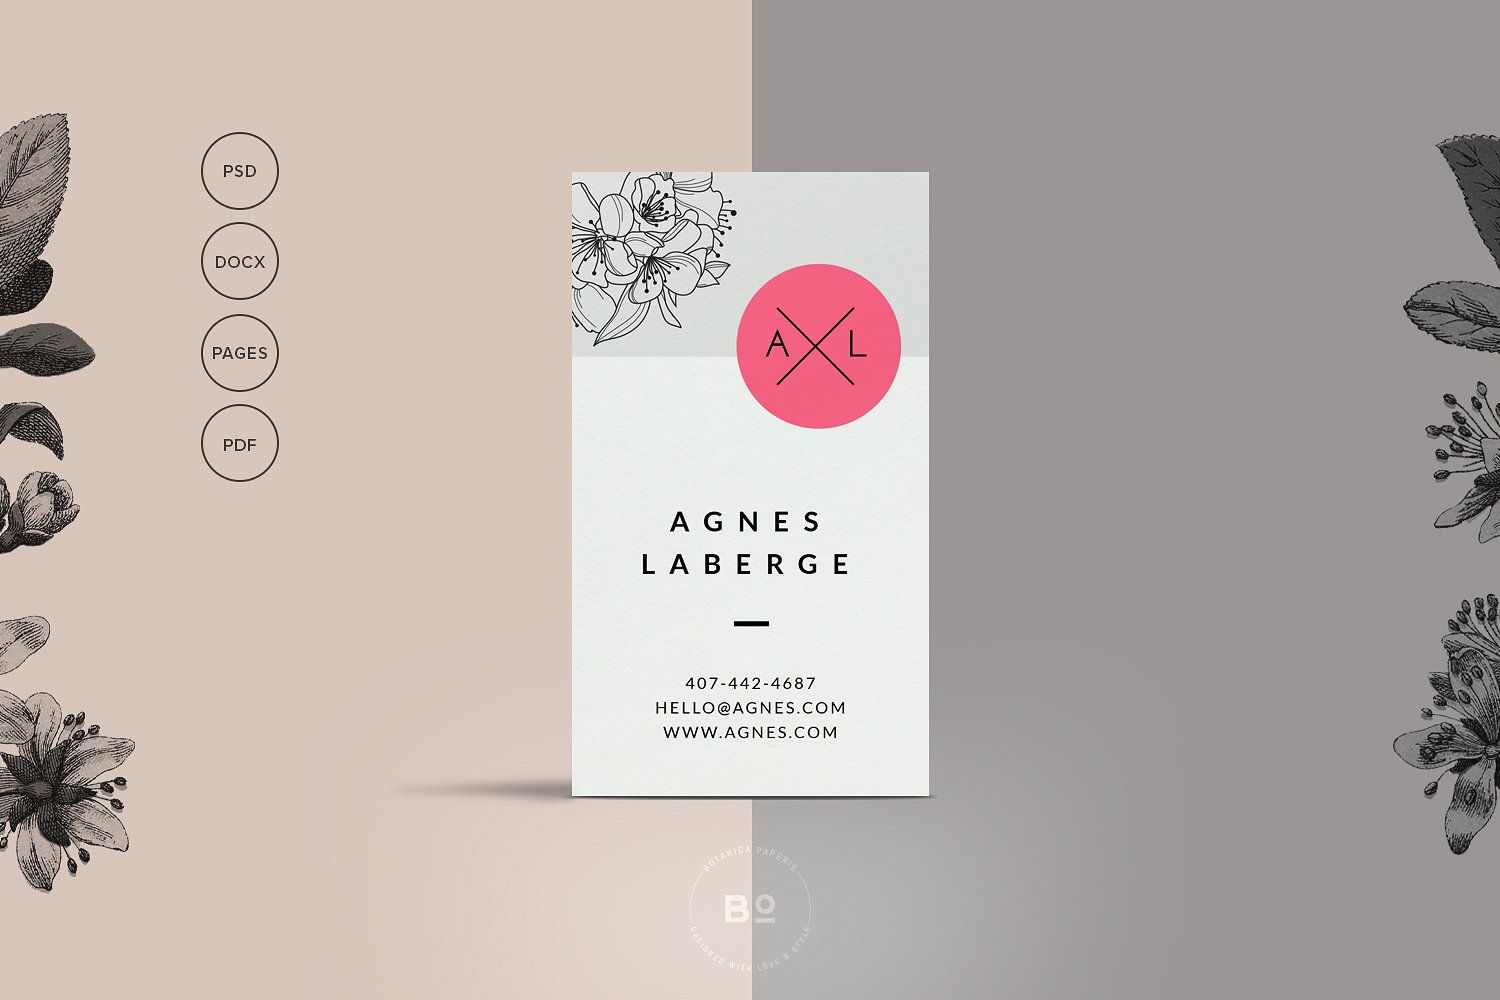 An amazing business card floral style